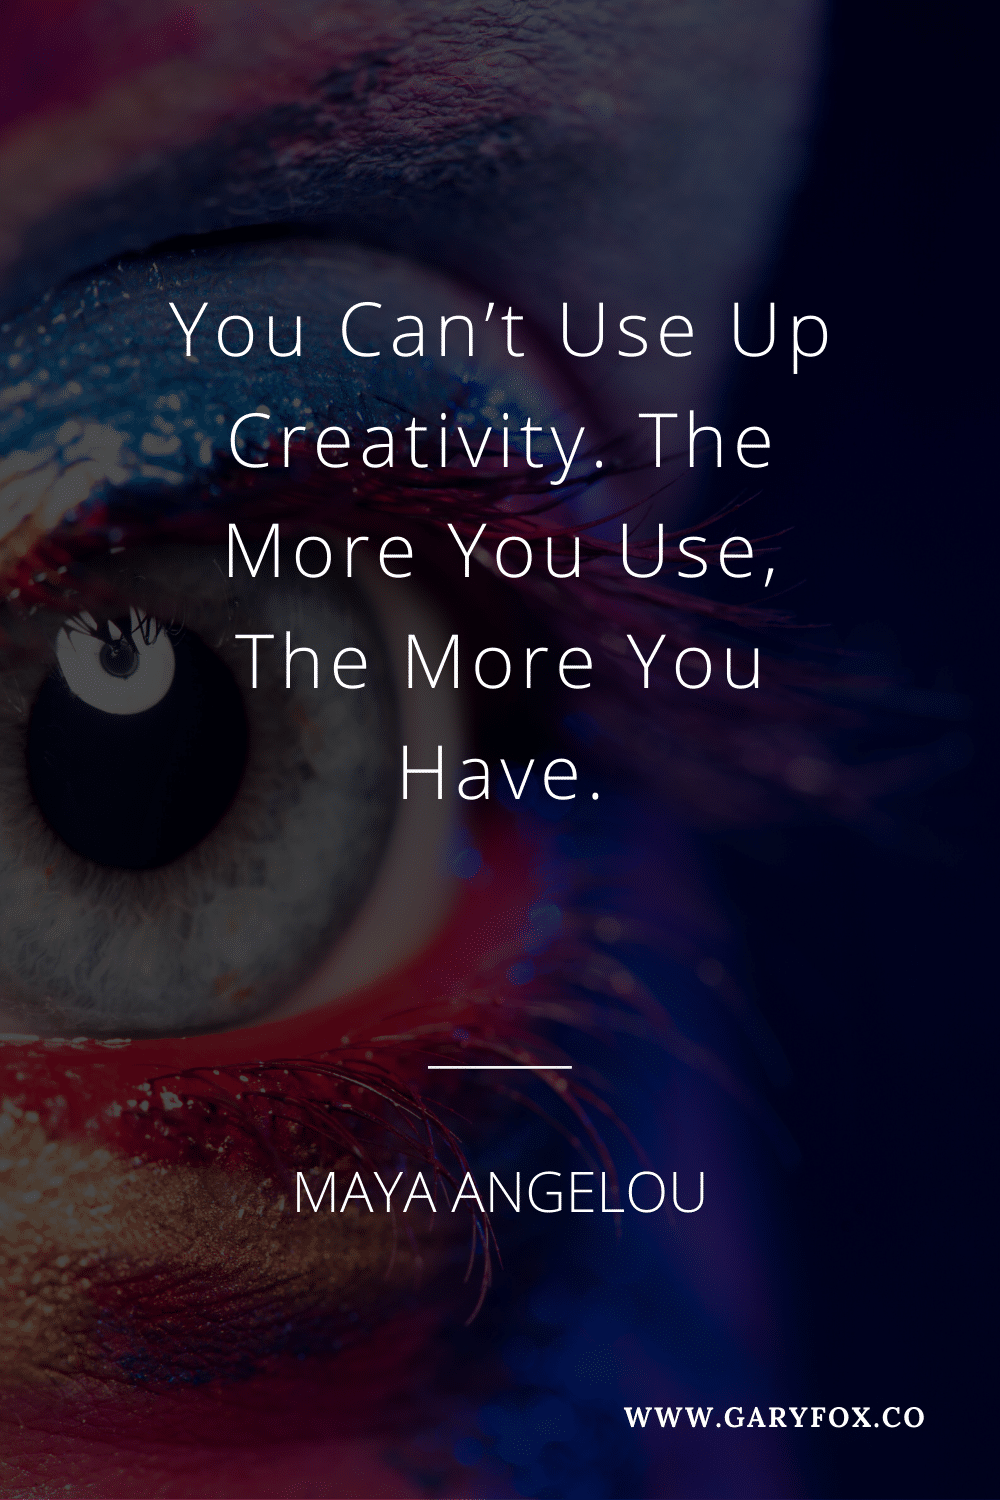 You Can’t Use Up Creativity The More You Use The More You Have. - Maya Angelou